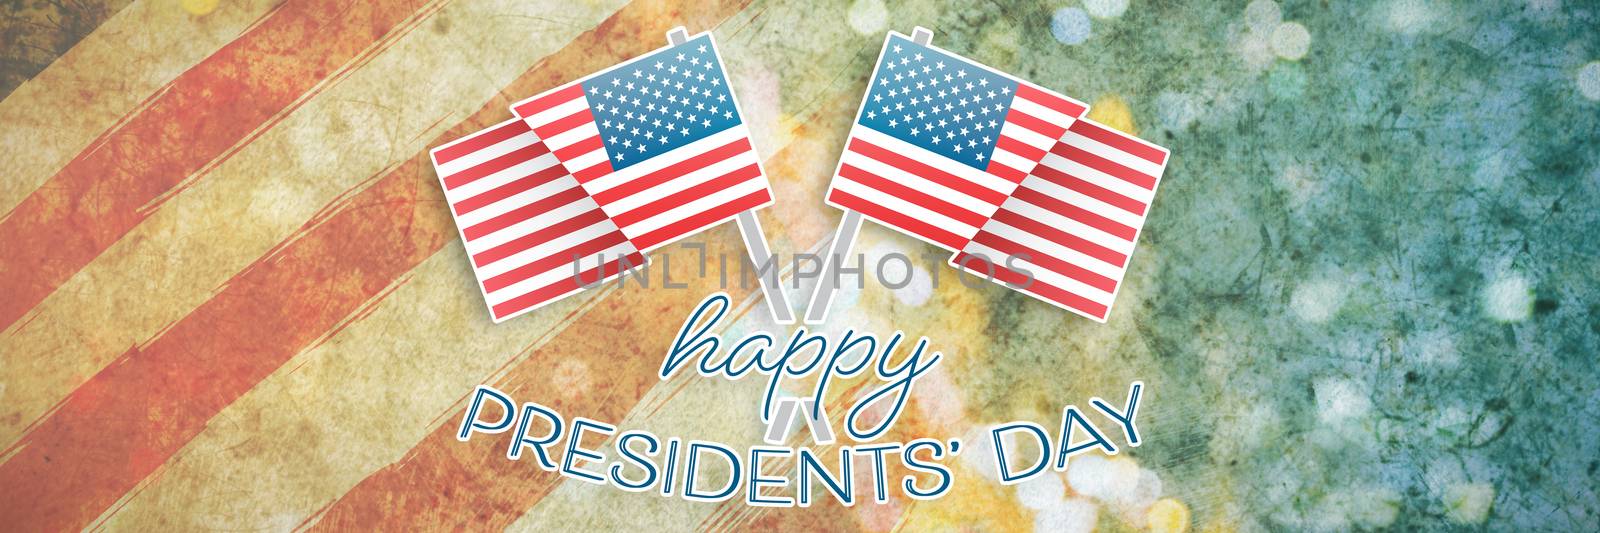 happy presidents day vector typography and two american flags against new york